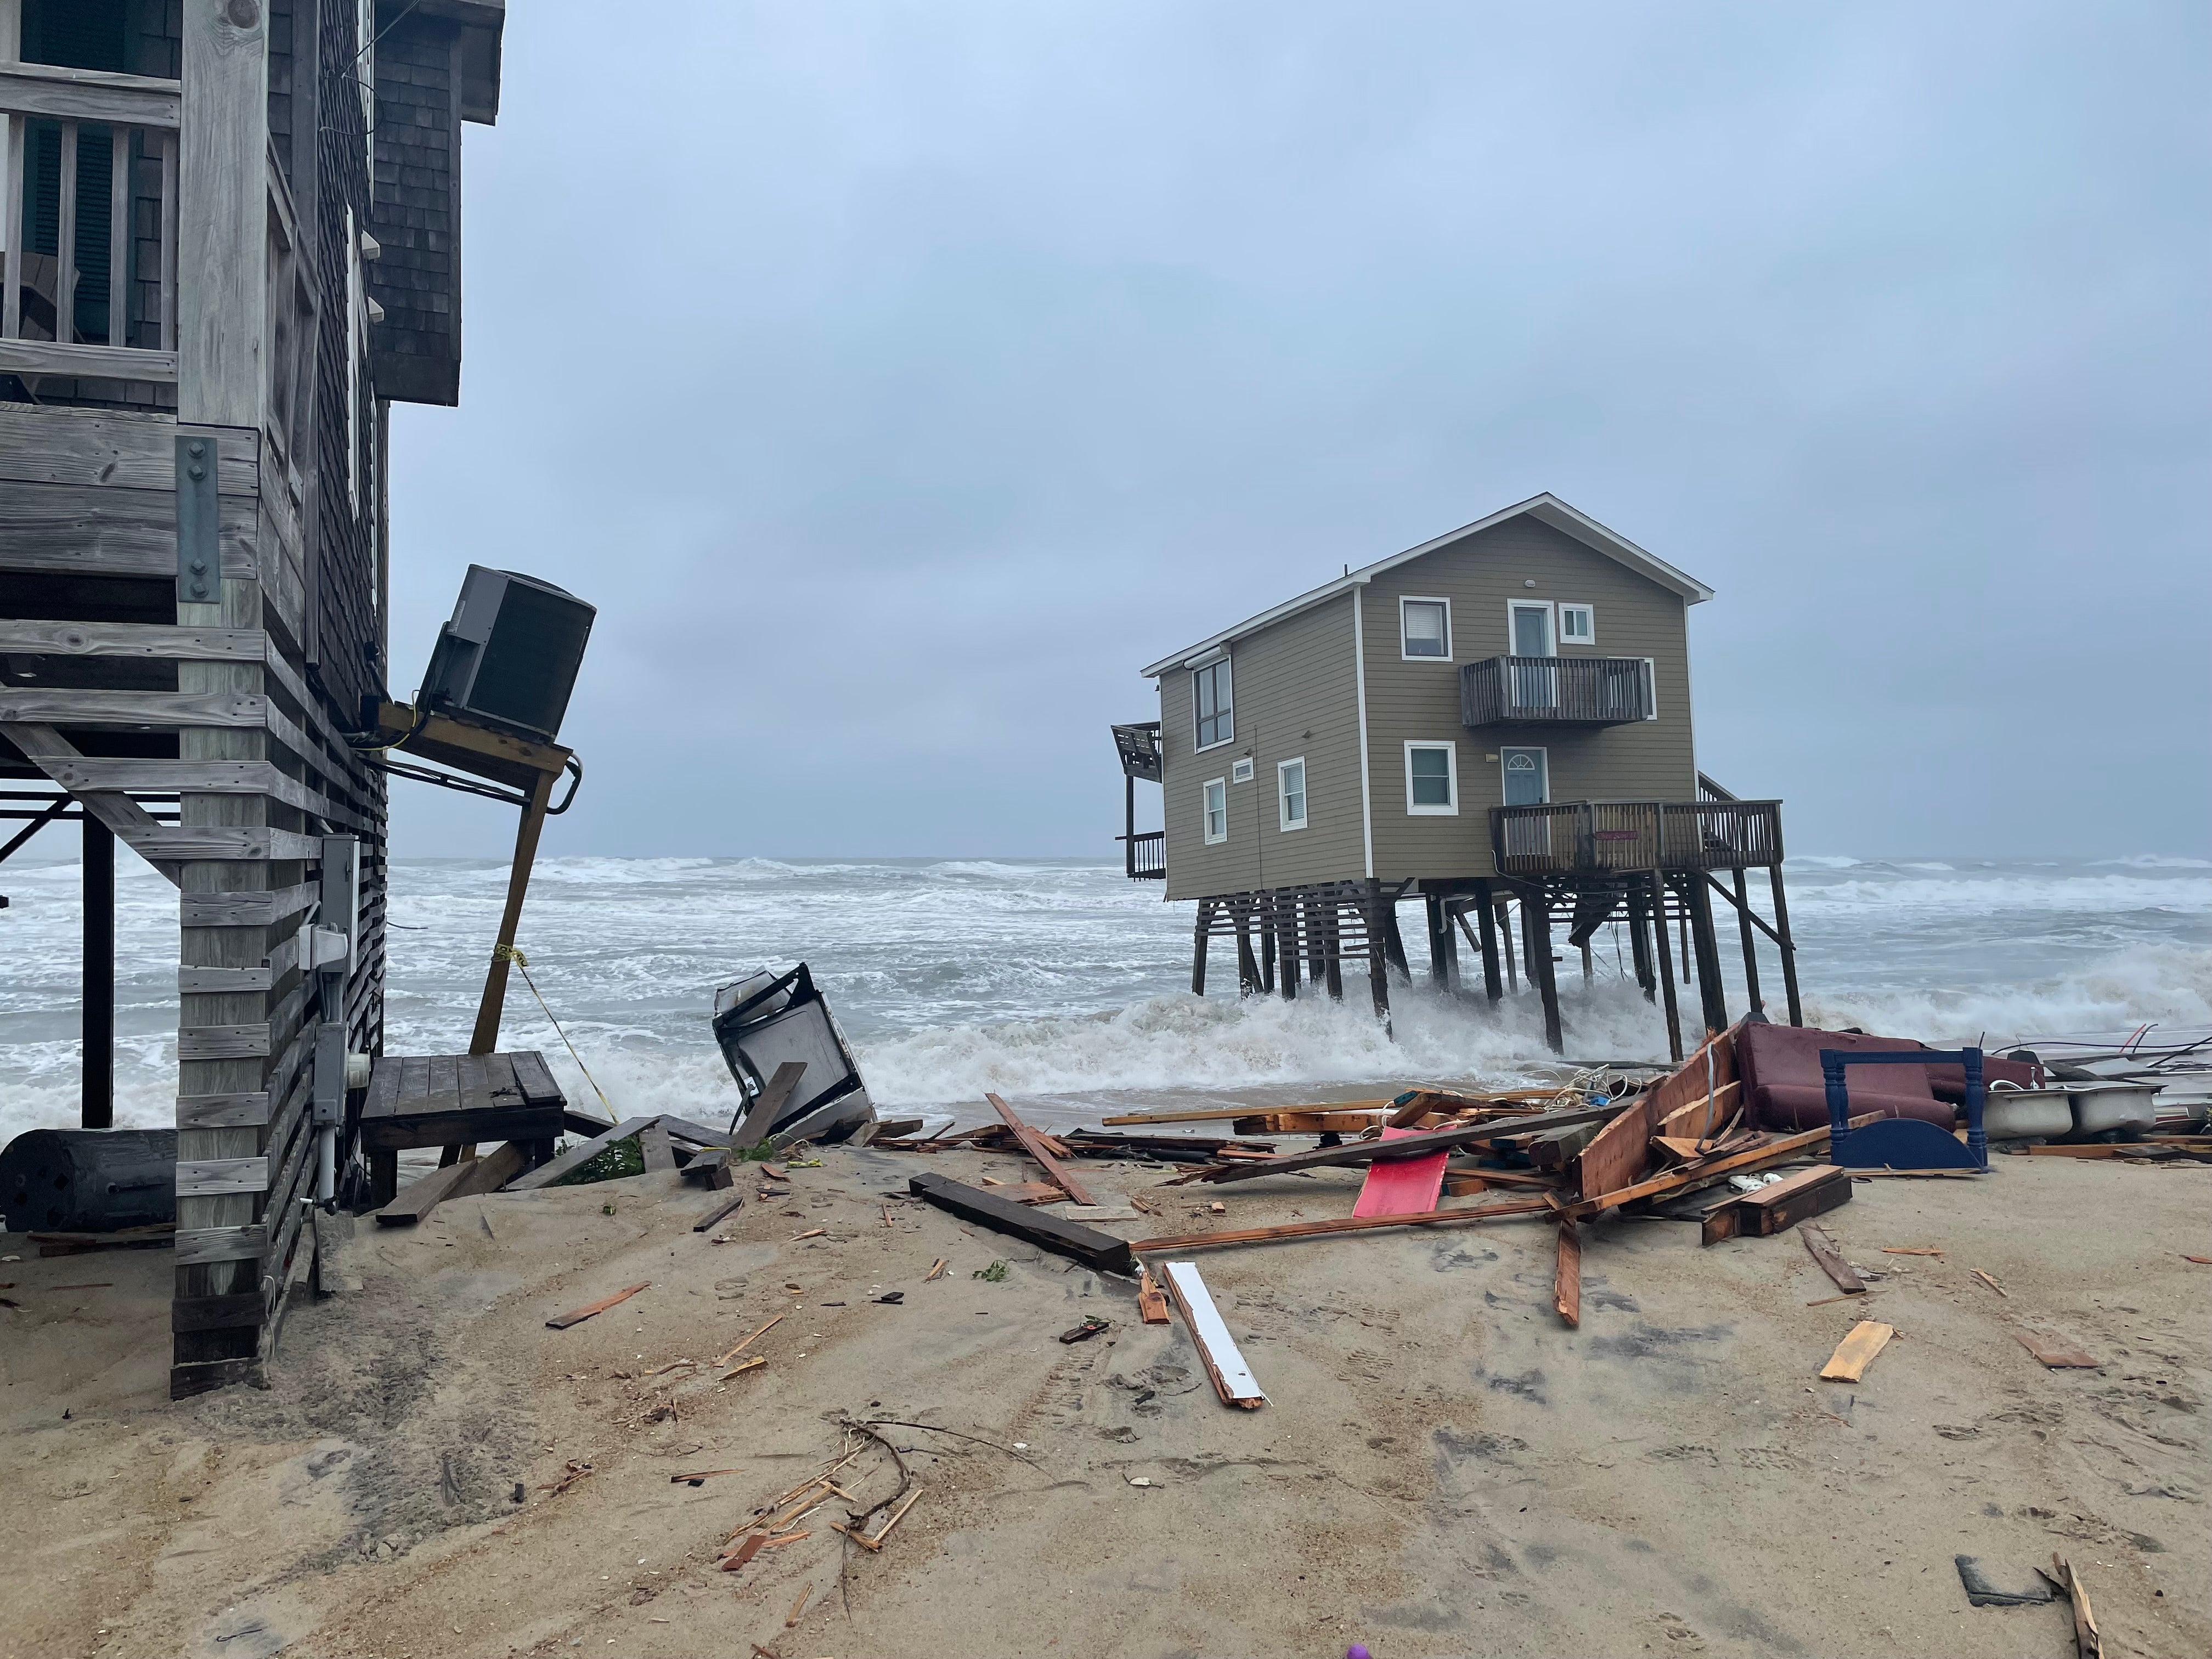 Prior to falling, the house perched precariously over the encroaching tide. (Photo: Cape Hatteras NPS / National Park Service, Fair Use)